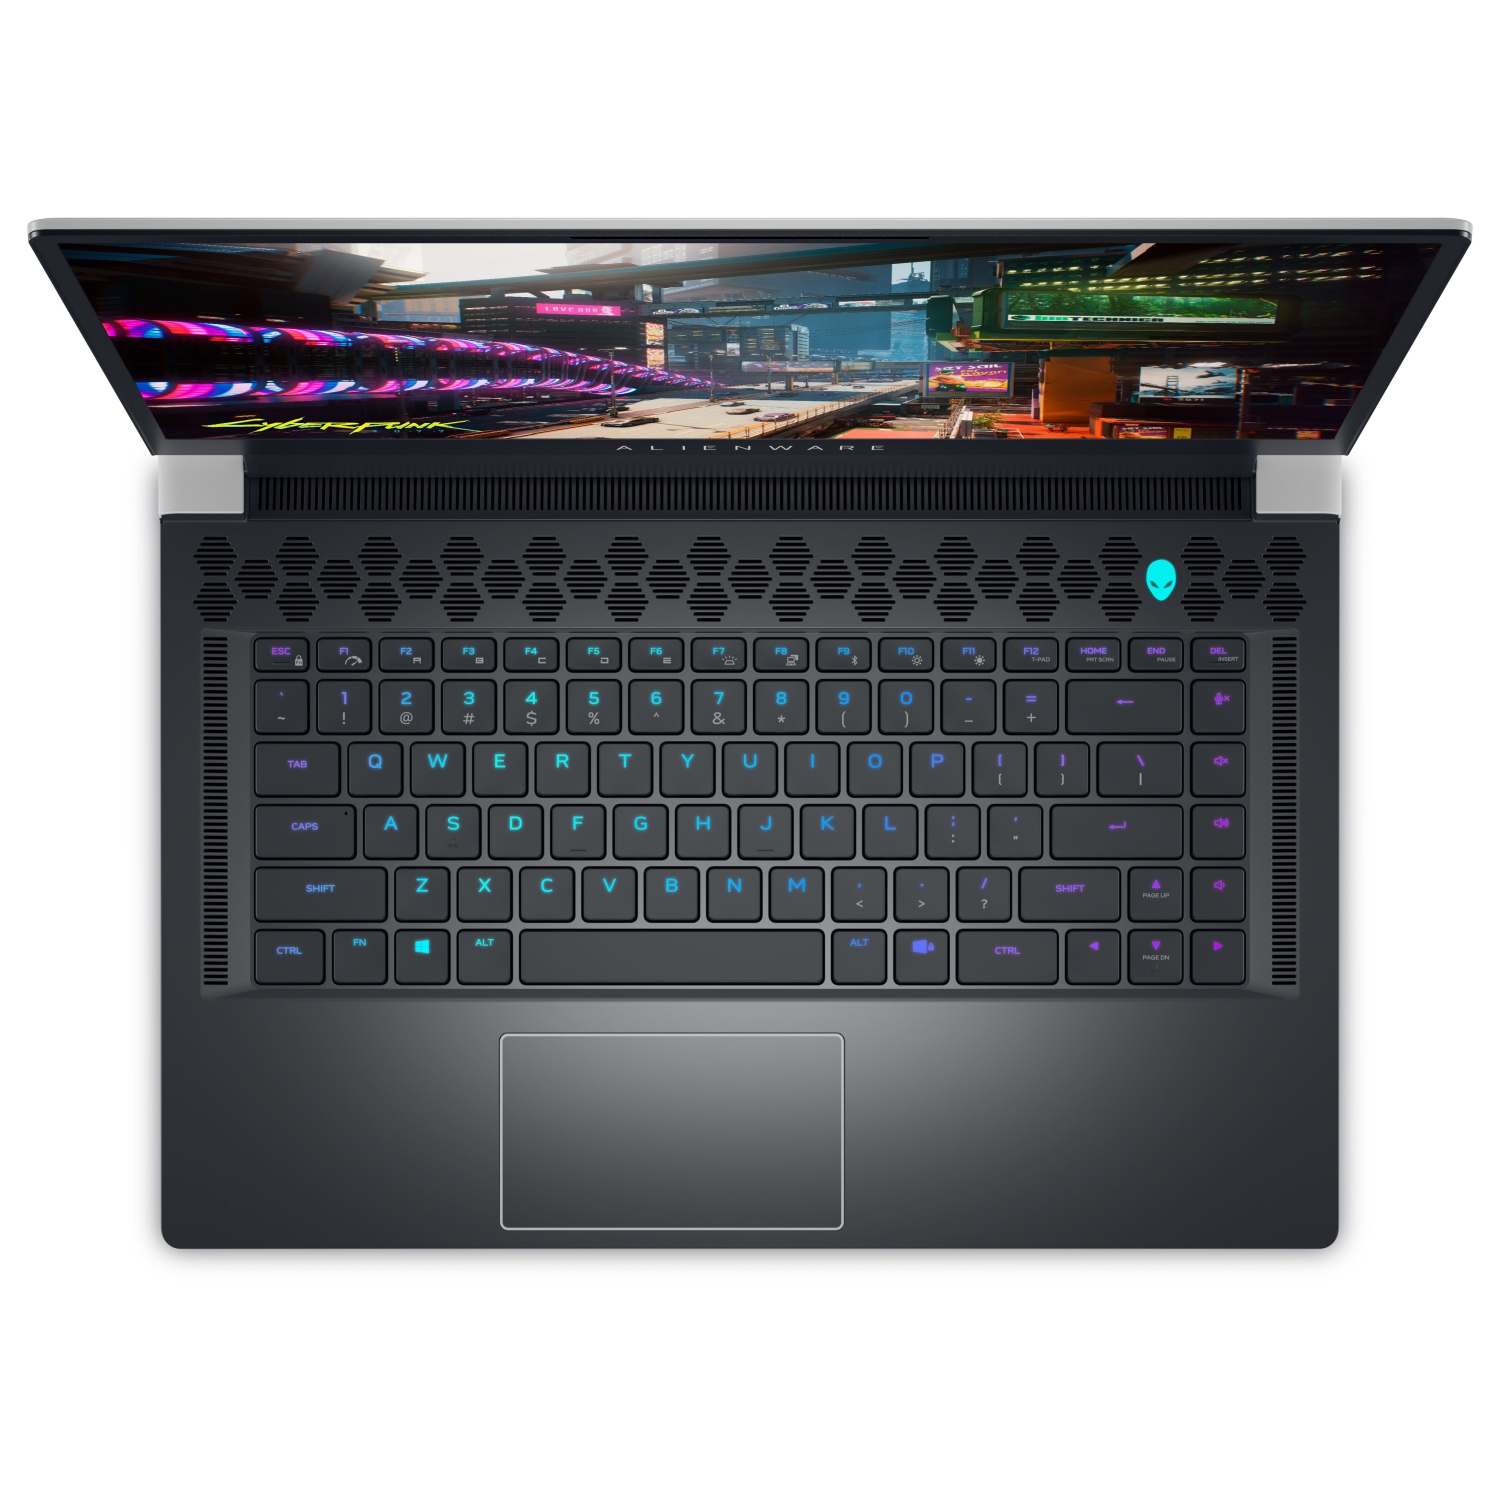 Refurbished (Excellent) – Dell Alienware X15 R2 Gaming Laptop (2022) | 15.6" FHD | Core i7 - 1TB SSD - 16GB RAM - 3070 Ti | 14 Cores @ 4.7 GHz - 12th Gen CPU - 8GB GDDR6X